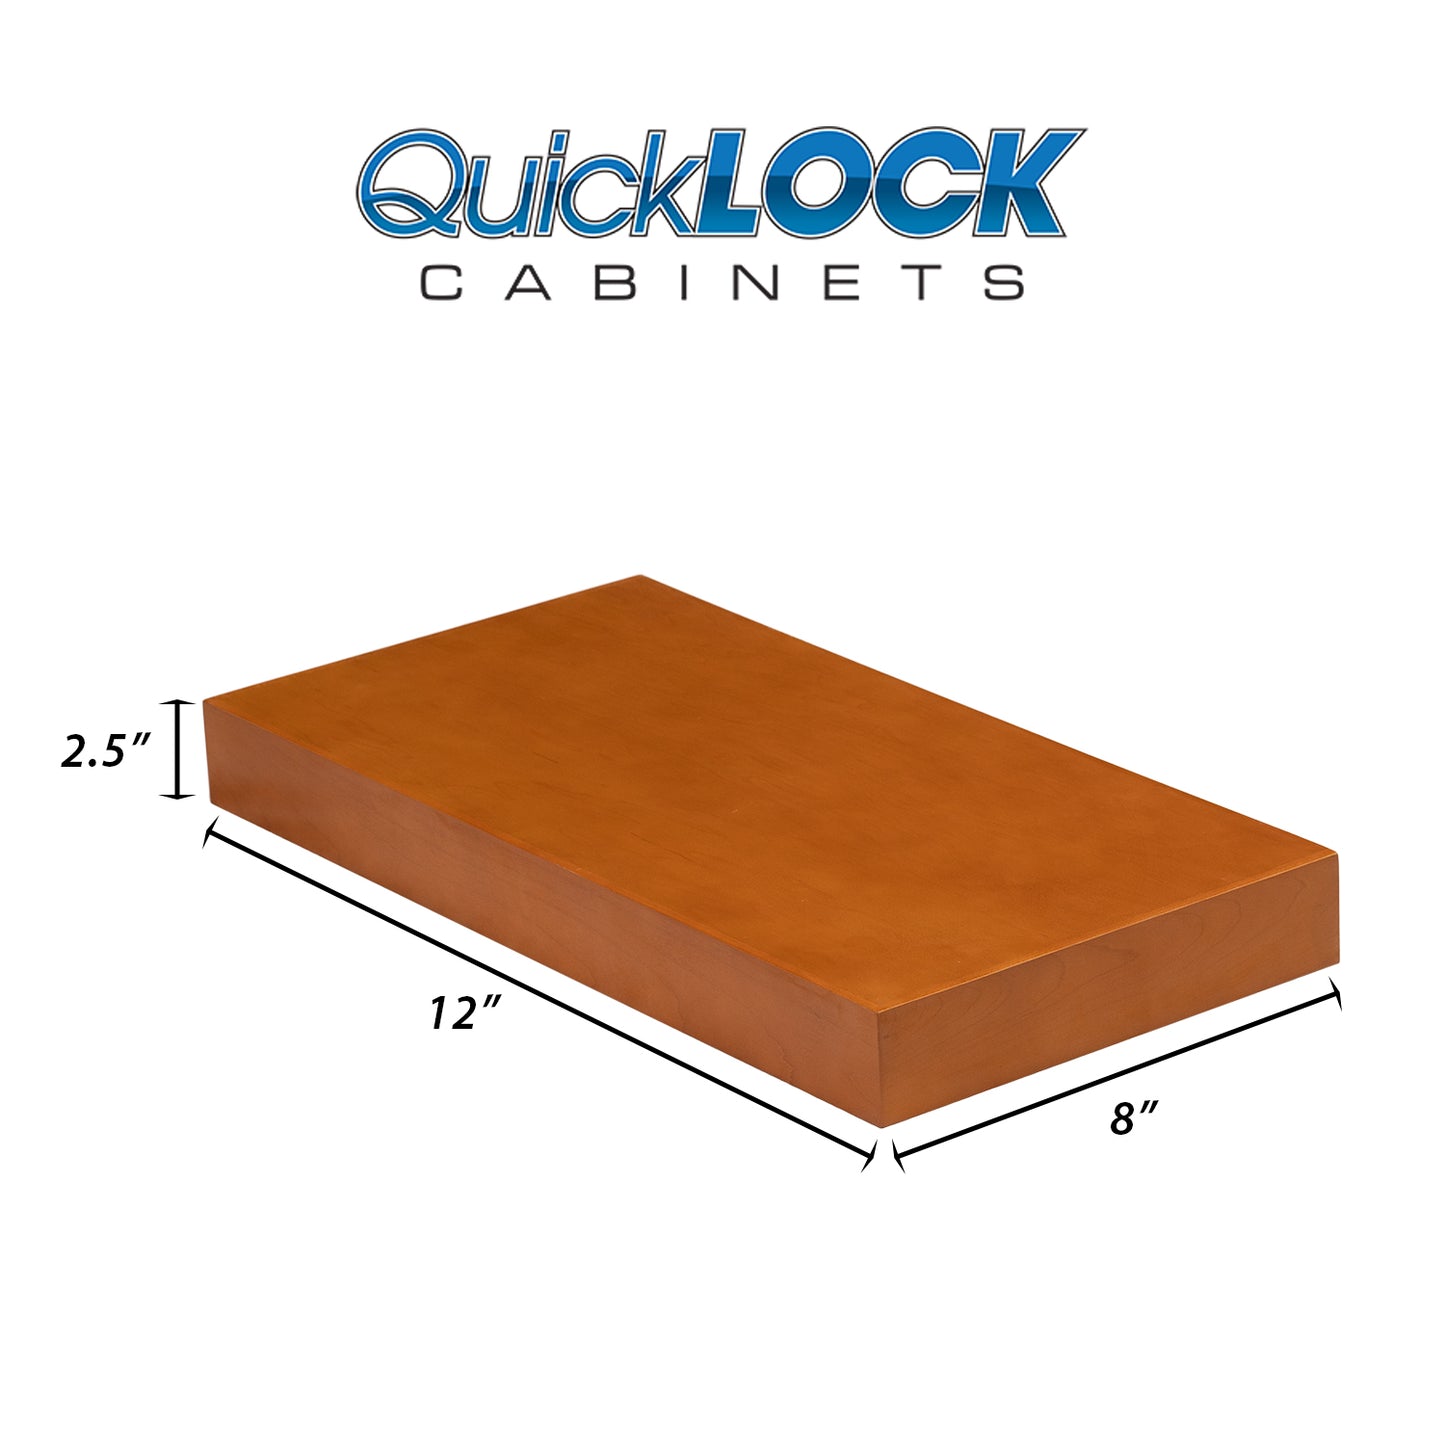 Quicklock Cabinets Floating Shelves | 2.5" Thick | Provincial Stain, 8" D x 12" W x 2.5" H | American Made | Hardwood Bracket | Complete Shelf Unit